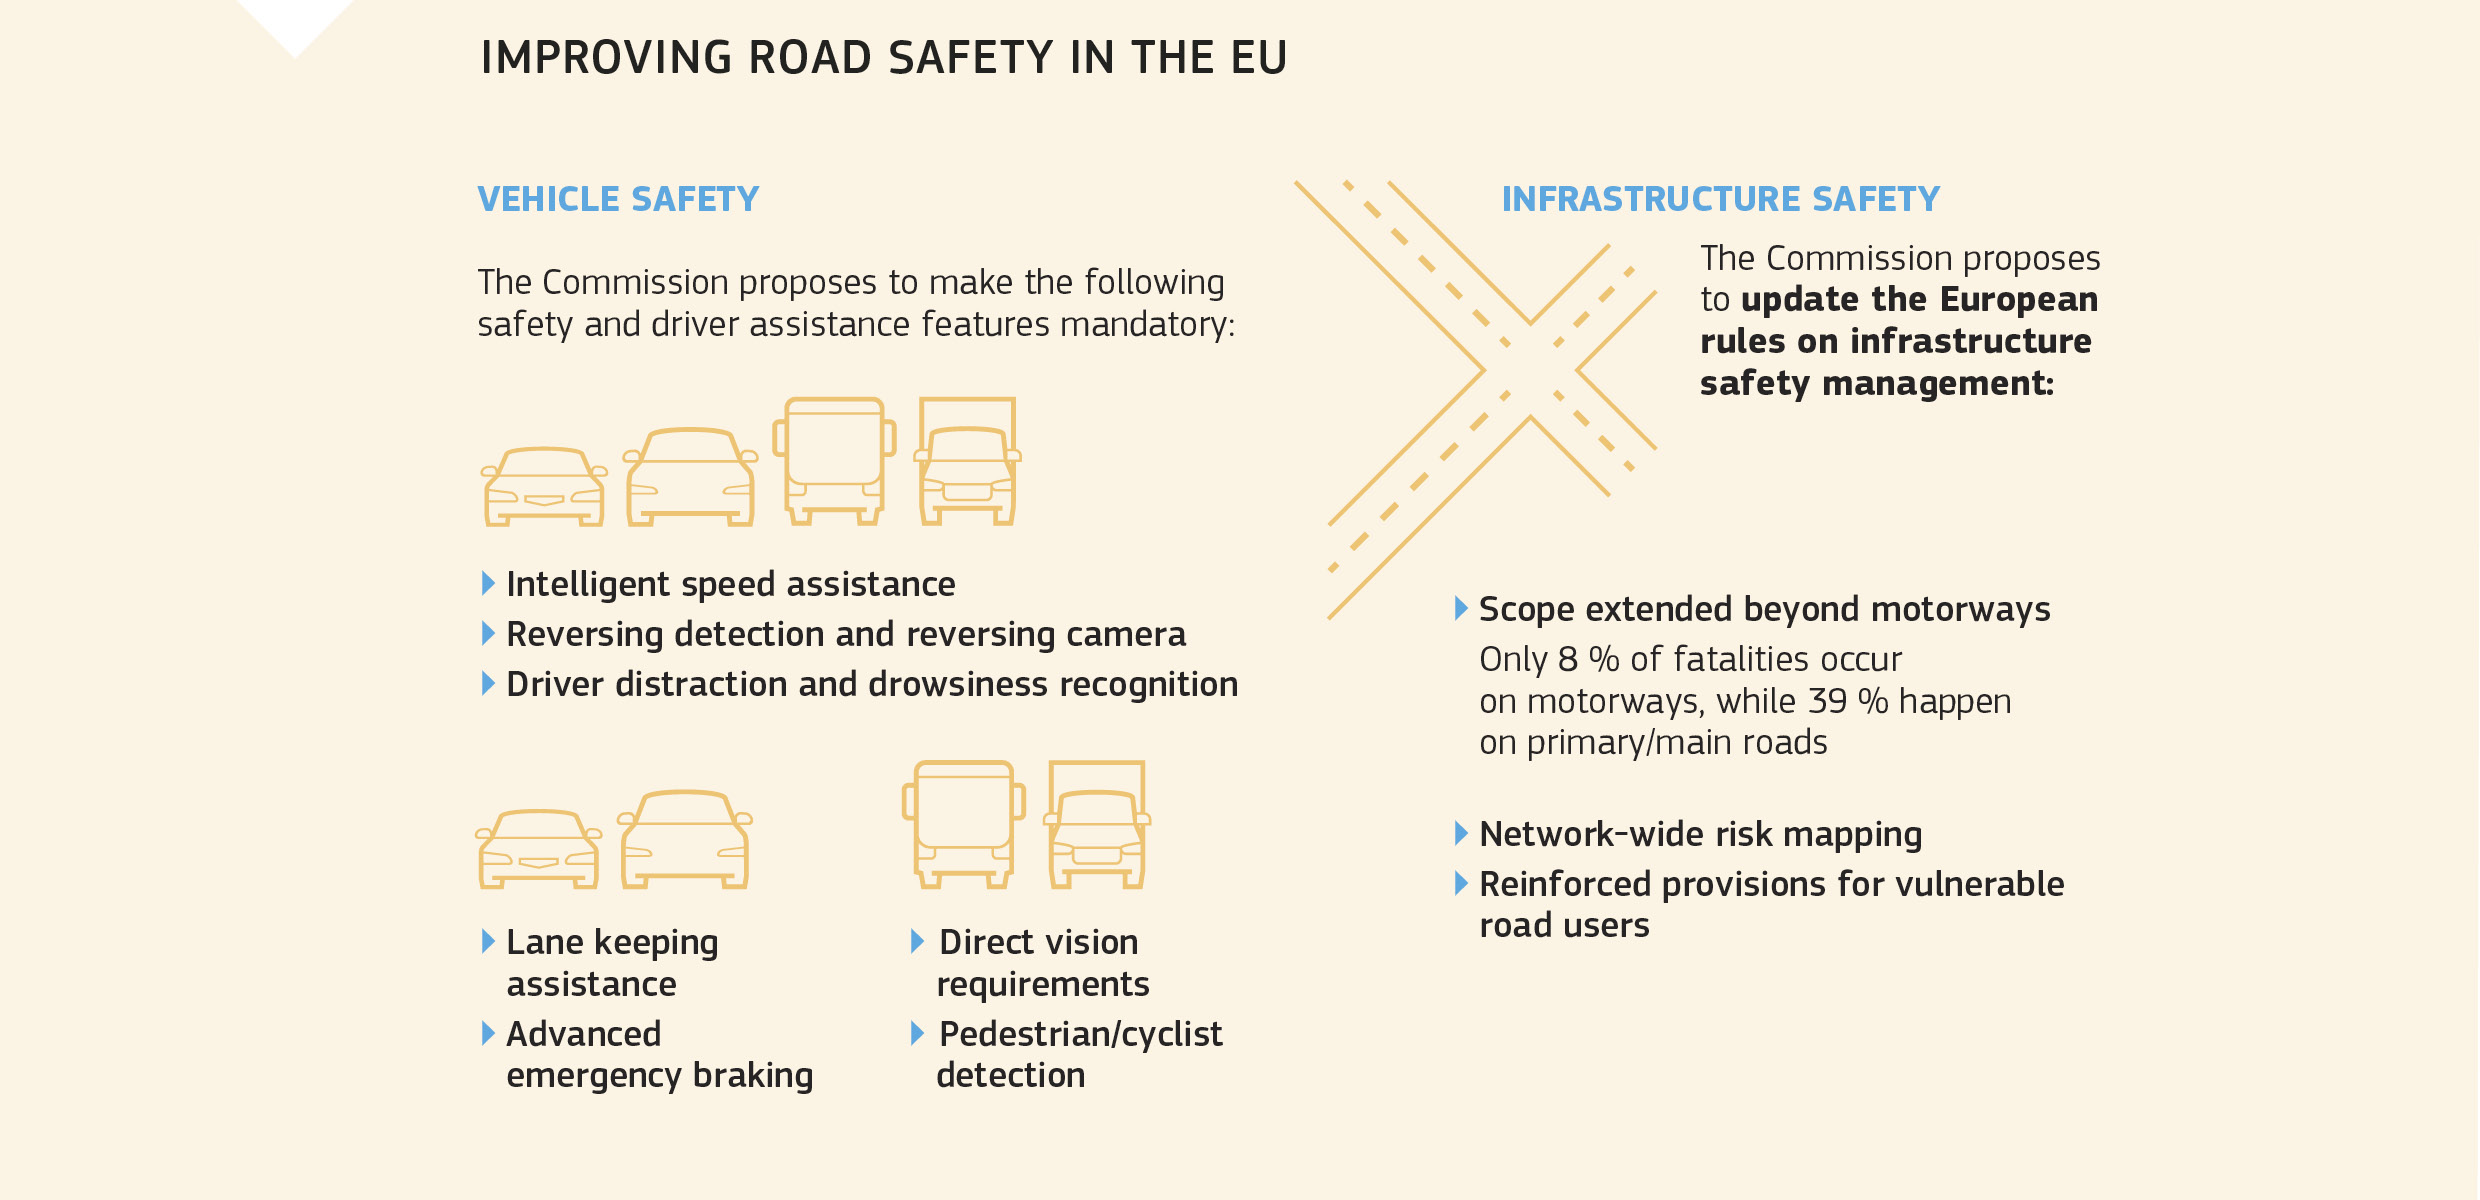 IMPROVING ROAD SAFETY IN THE EU